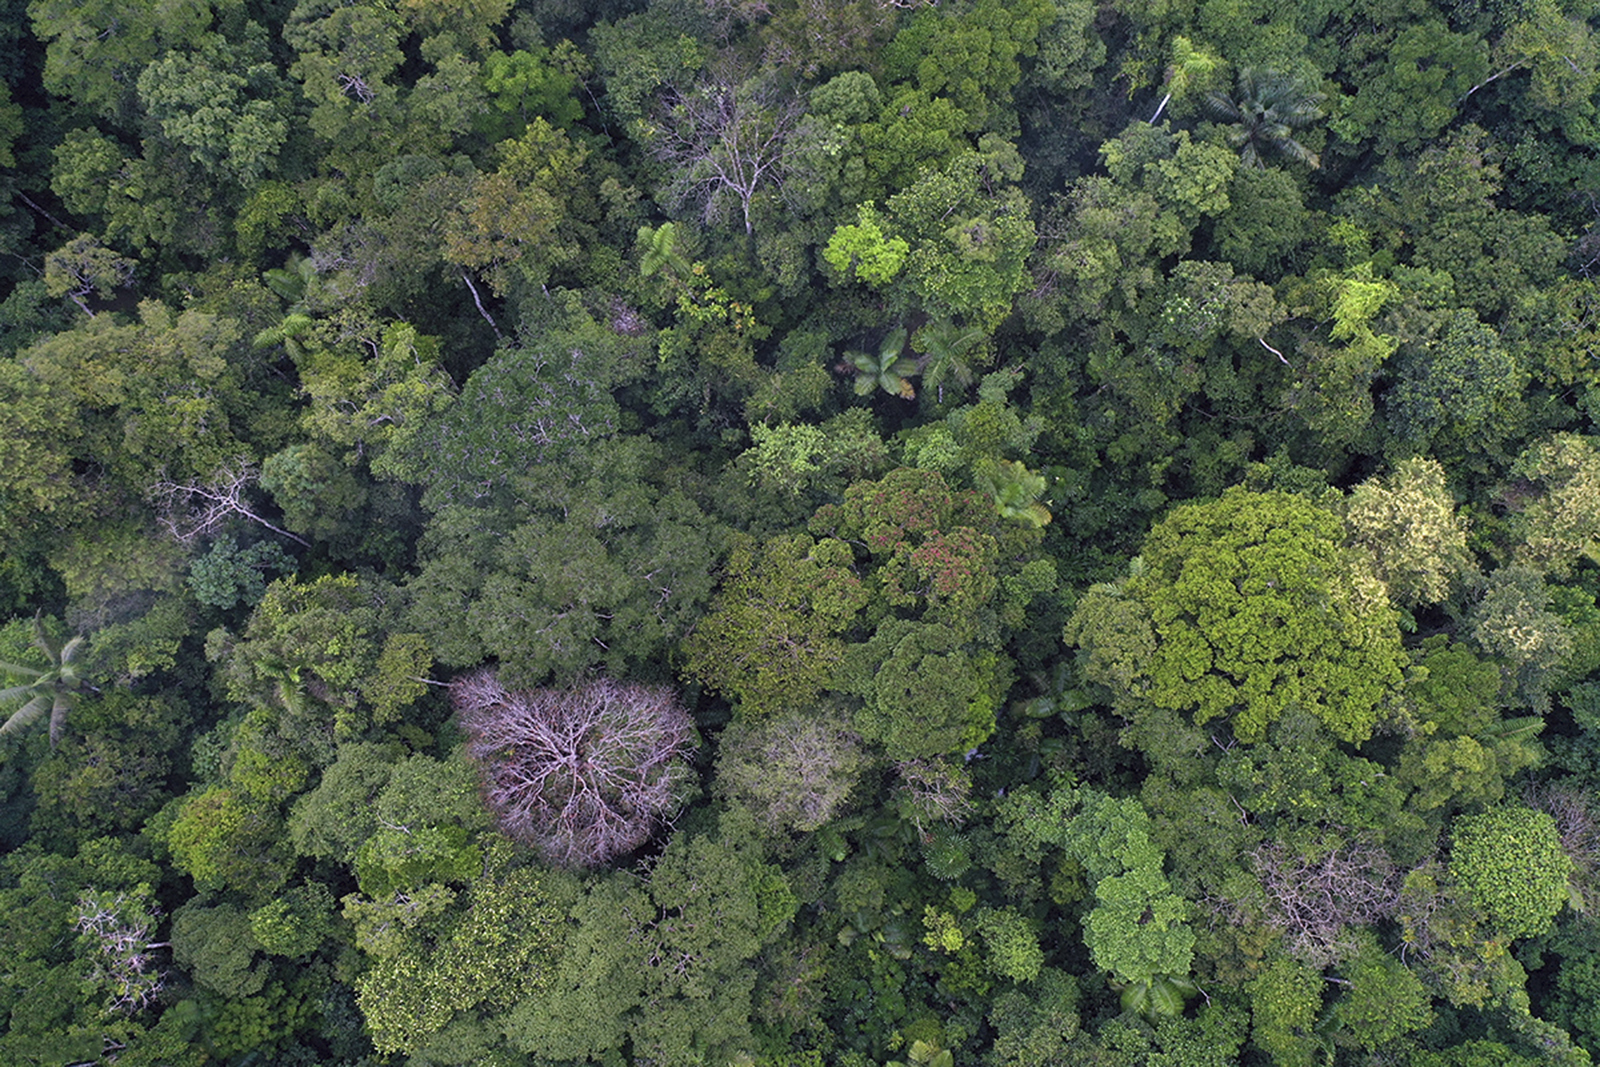 An overview of the tops of trees in the Amazon Forest.